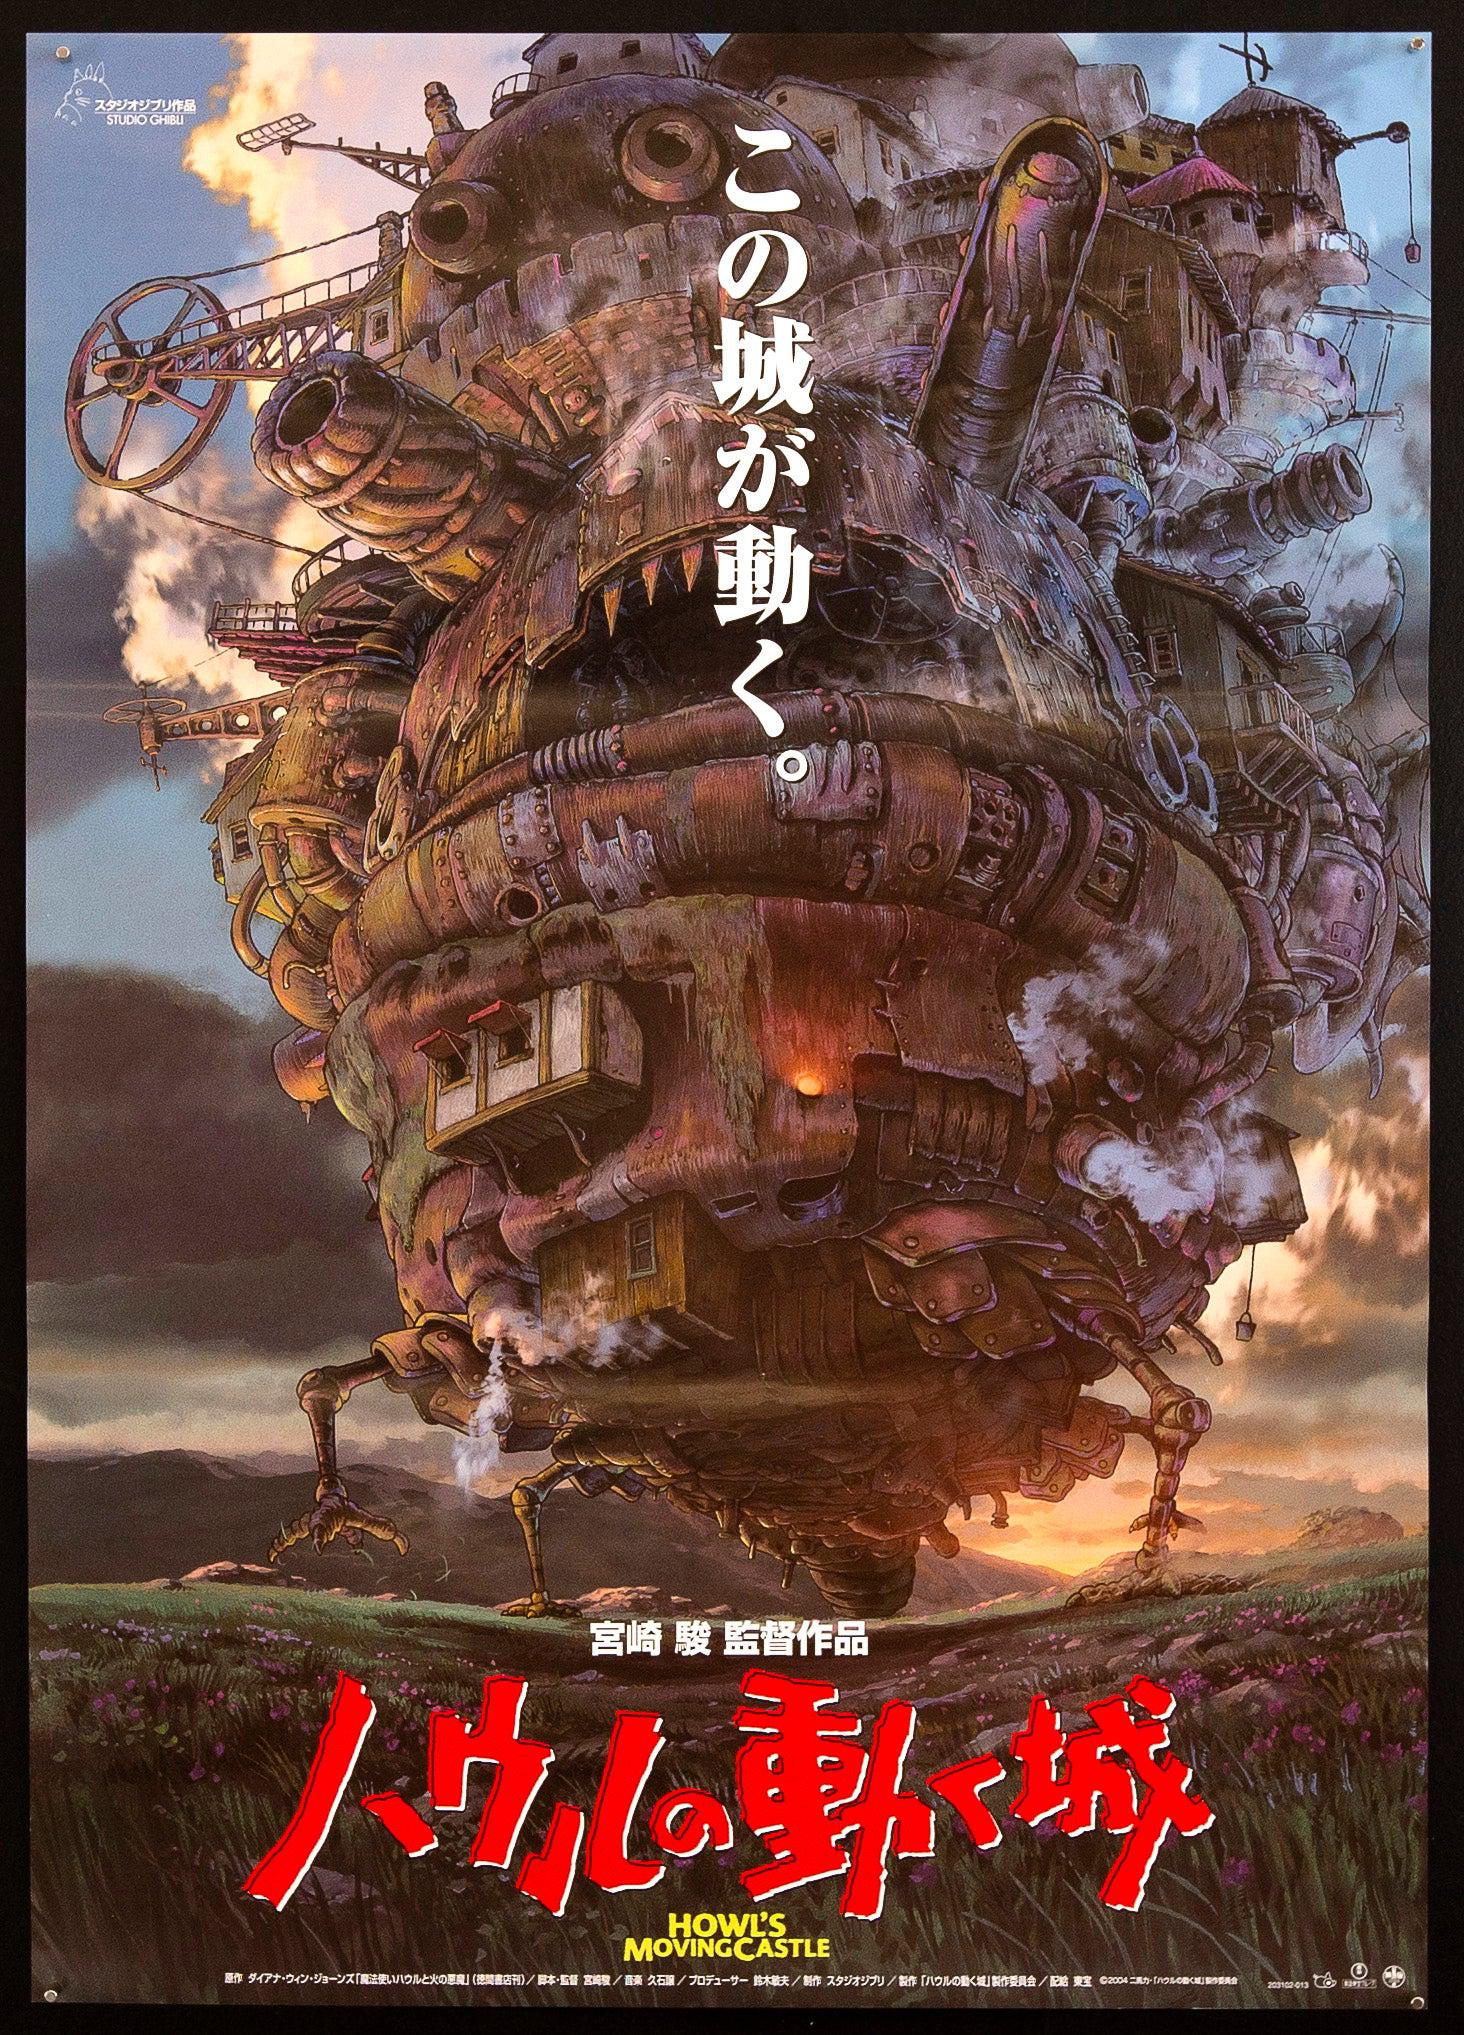 Howl's Moving Castle Movie Poster 2004 Japanese 1 panel (20x29)